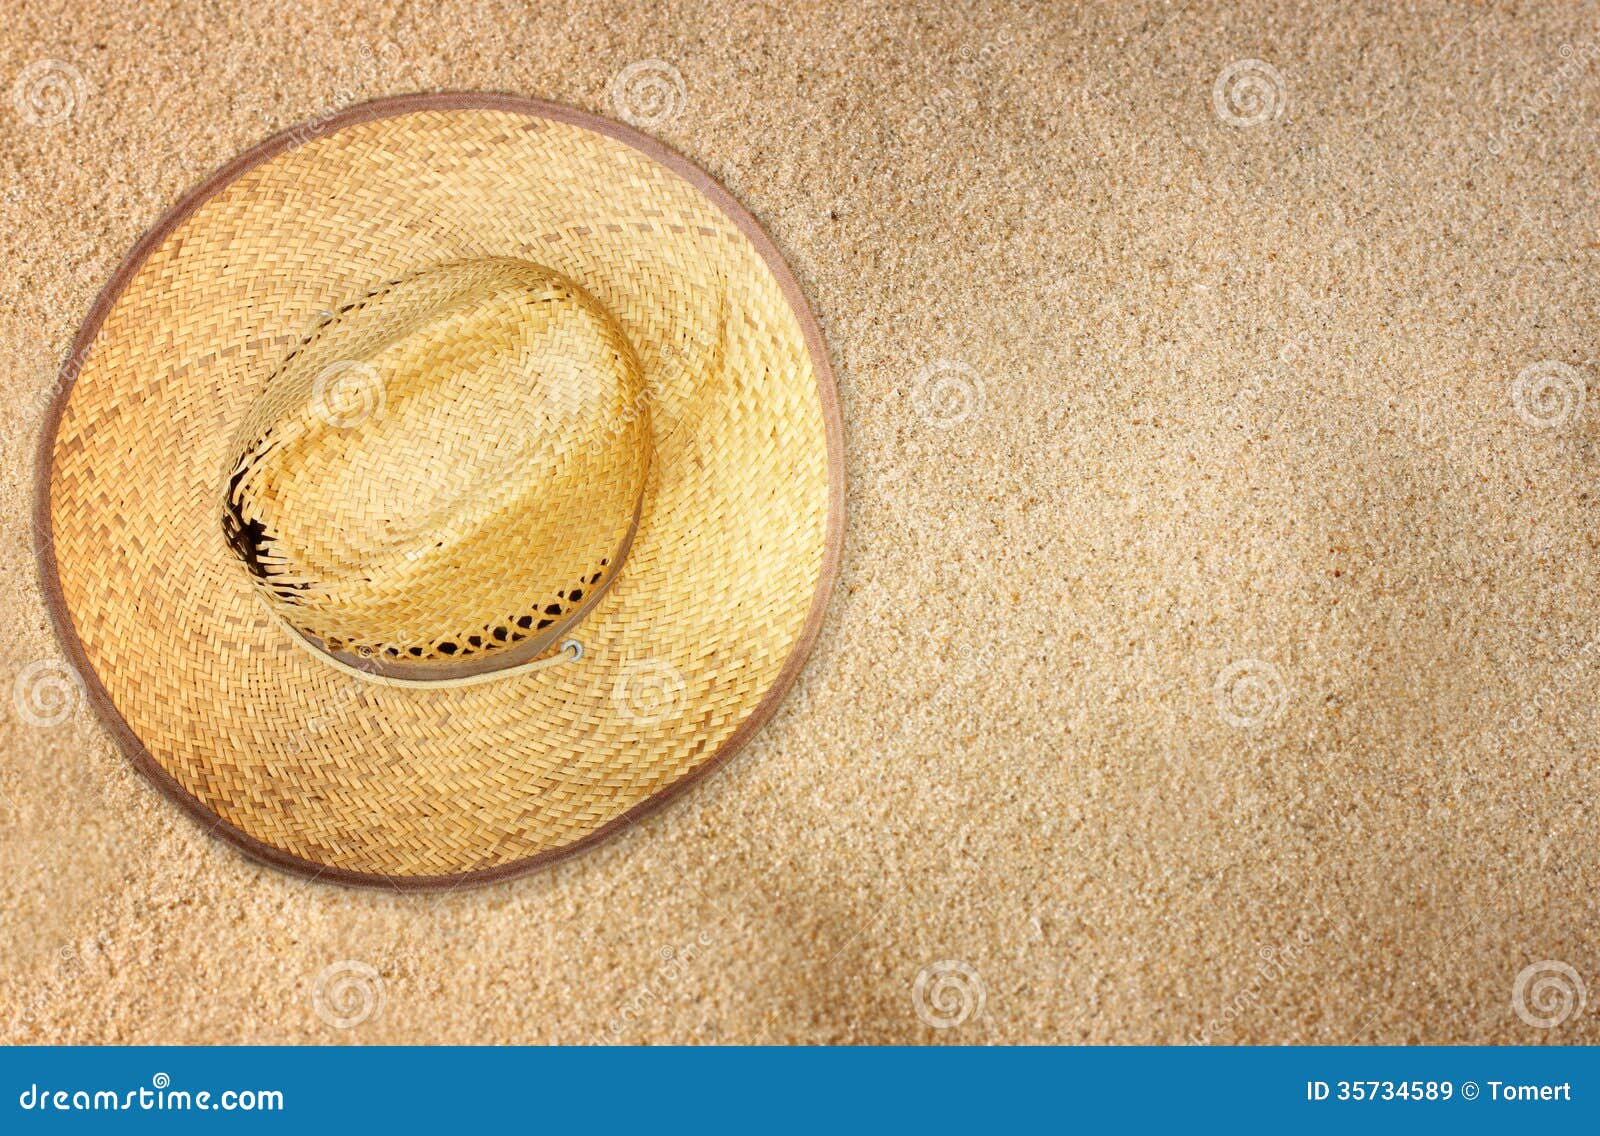 Top View of Straw Hat on Beach Sand Stock Image - Image of background ...